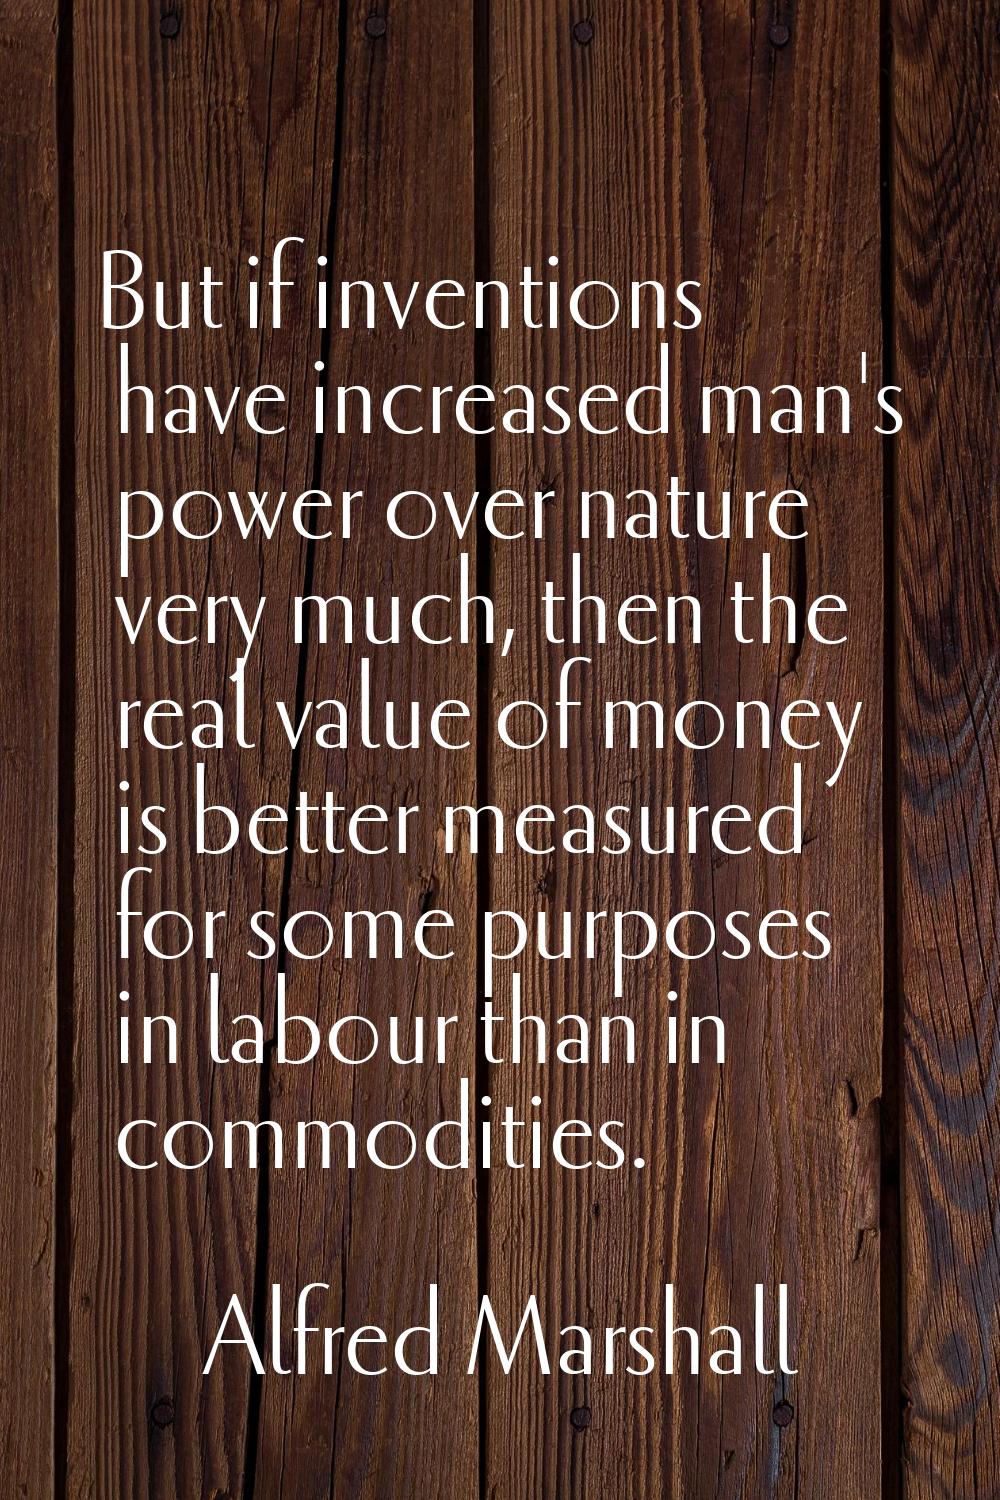 But if inventions have increased man's power over nature very much, then the real value of money is